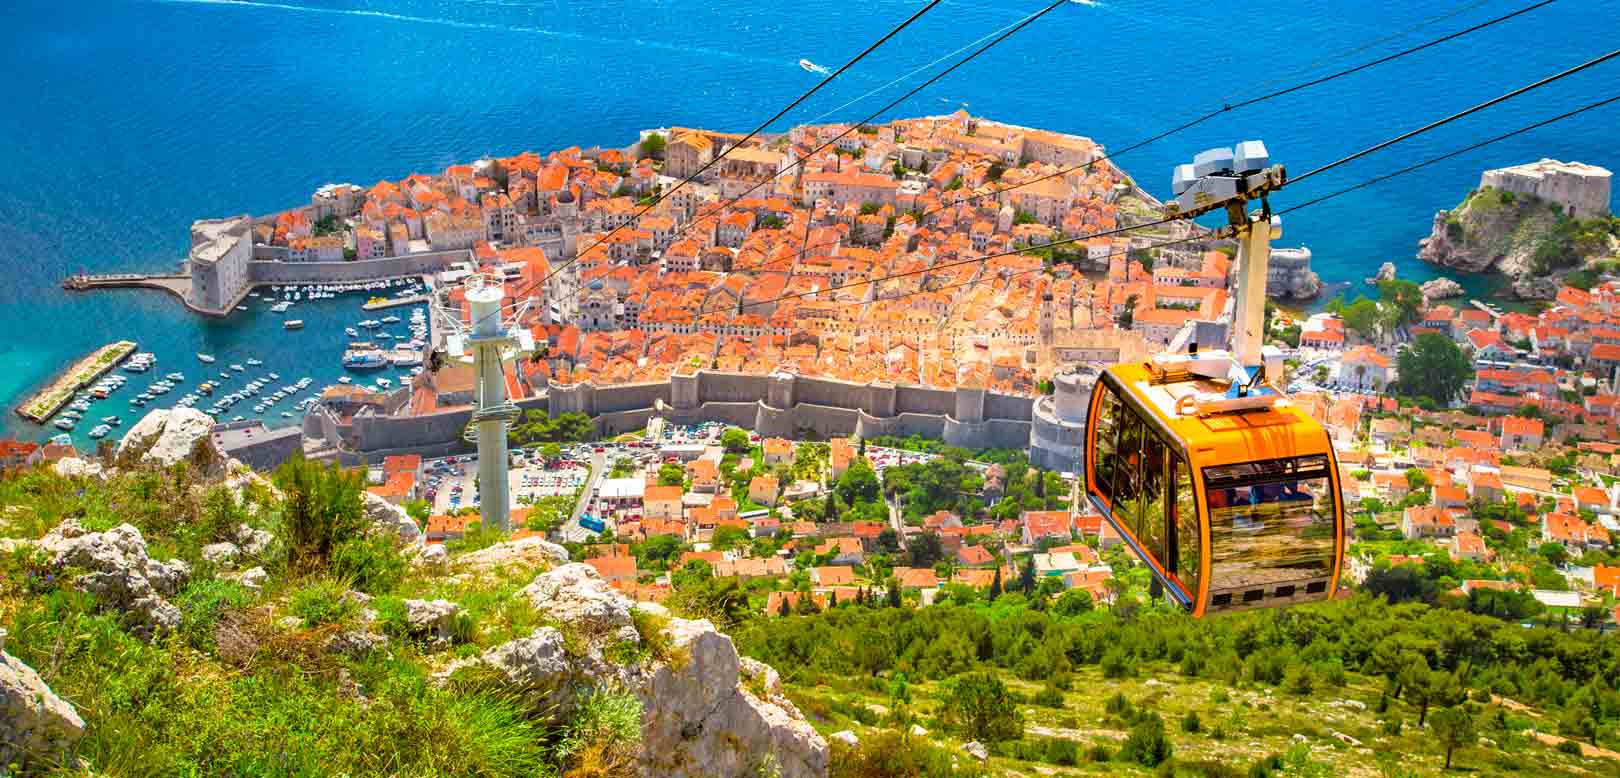 Things to Do in Dubrovnik : Mount Srd Cable Car